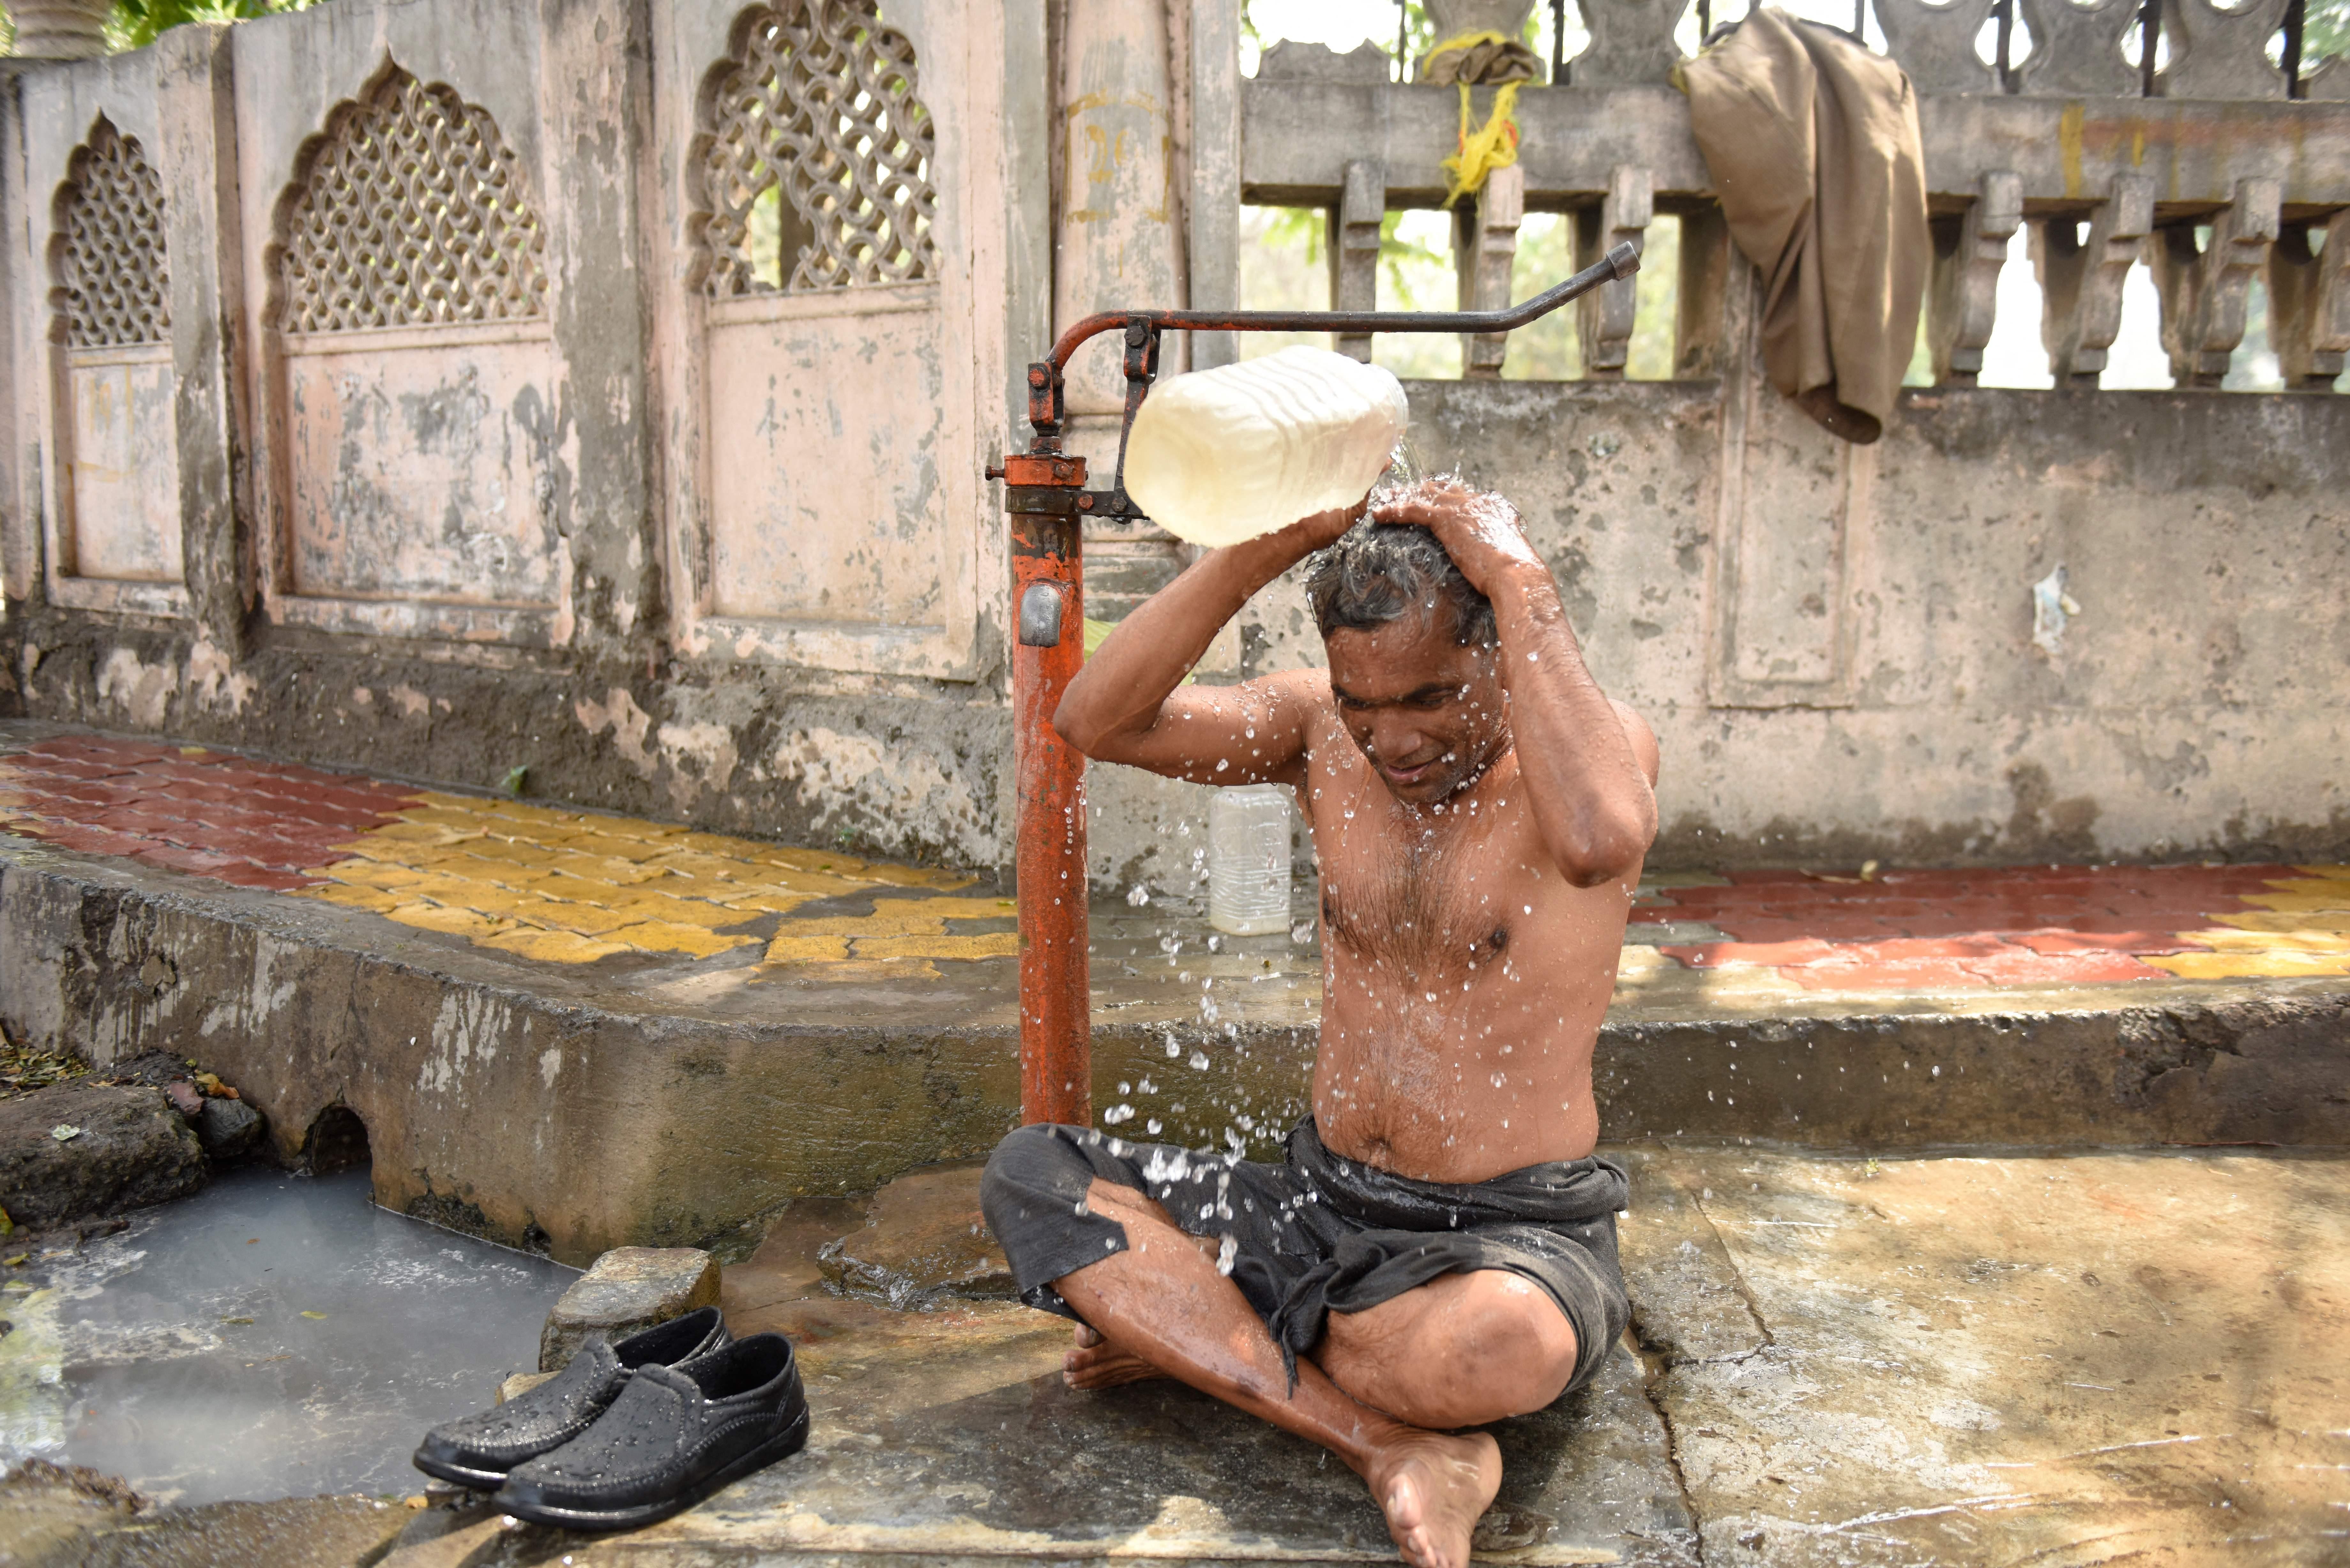 A man tries to cool off during a heatwave in Amritsar, India on April 30, 2022. 